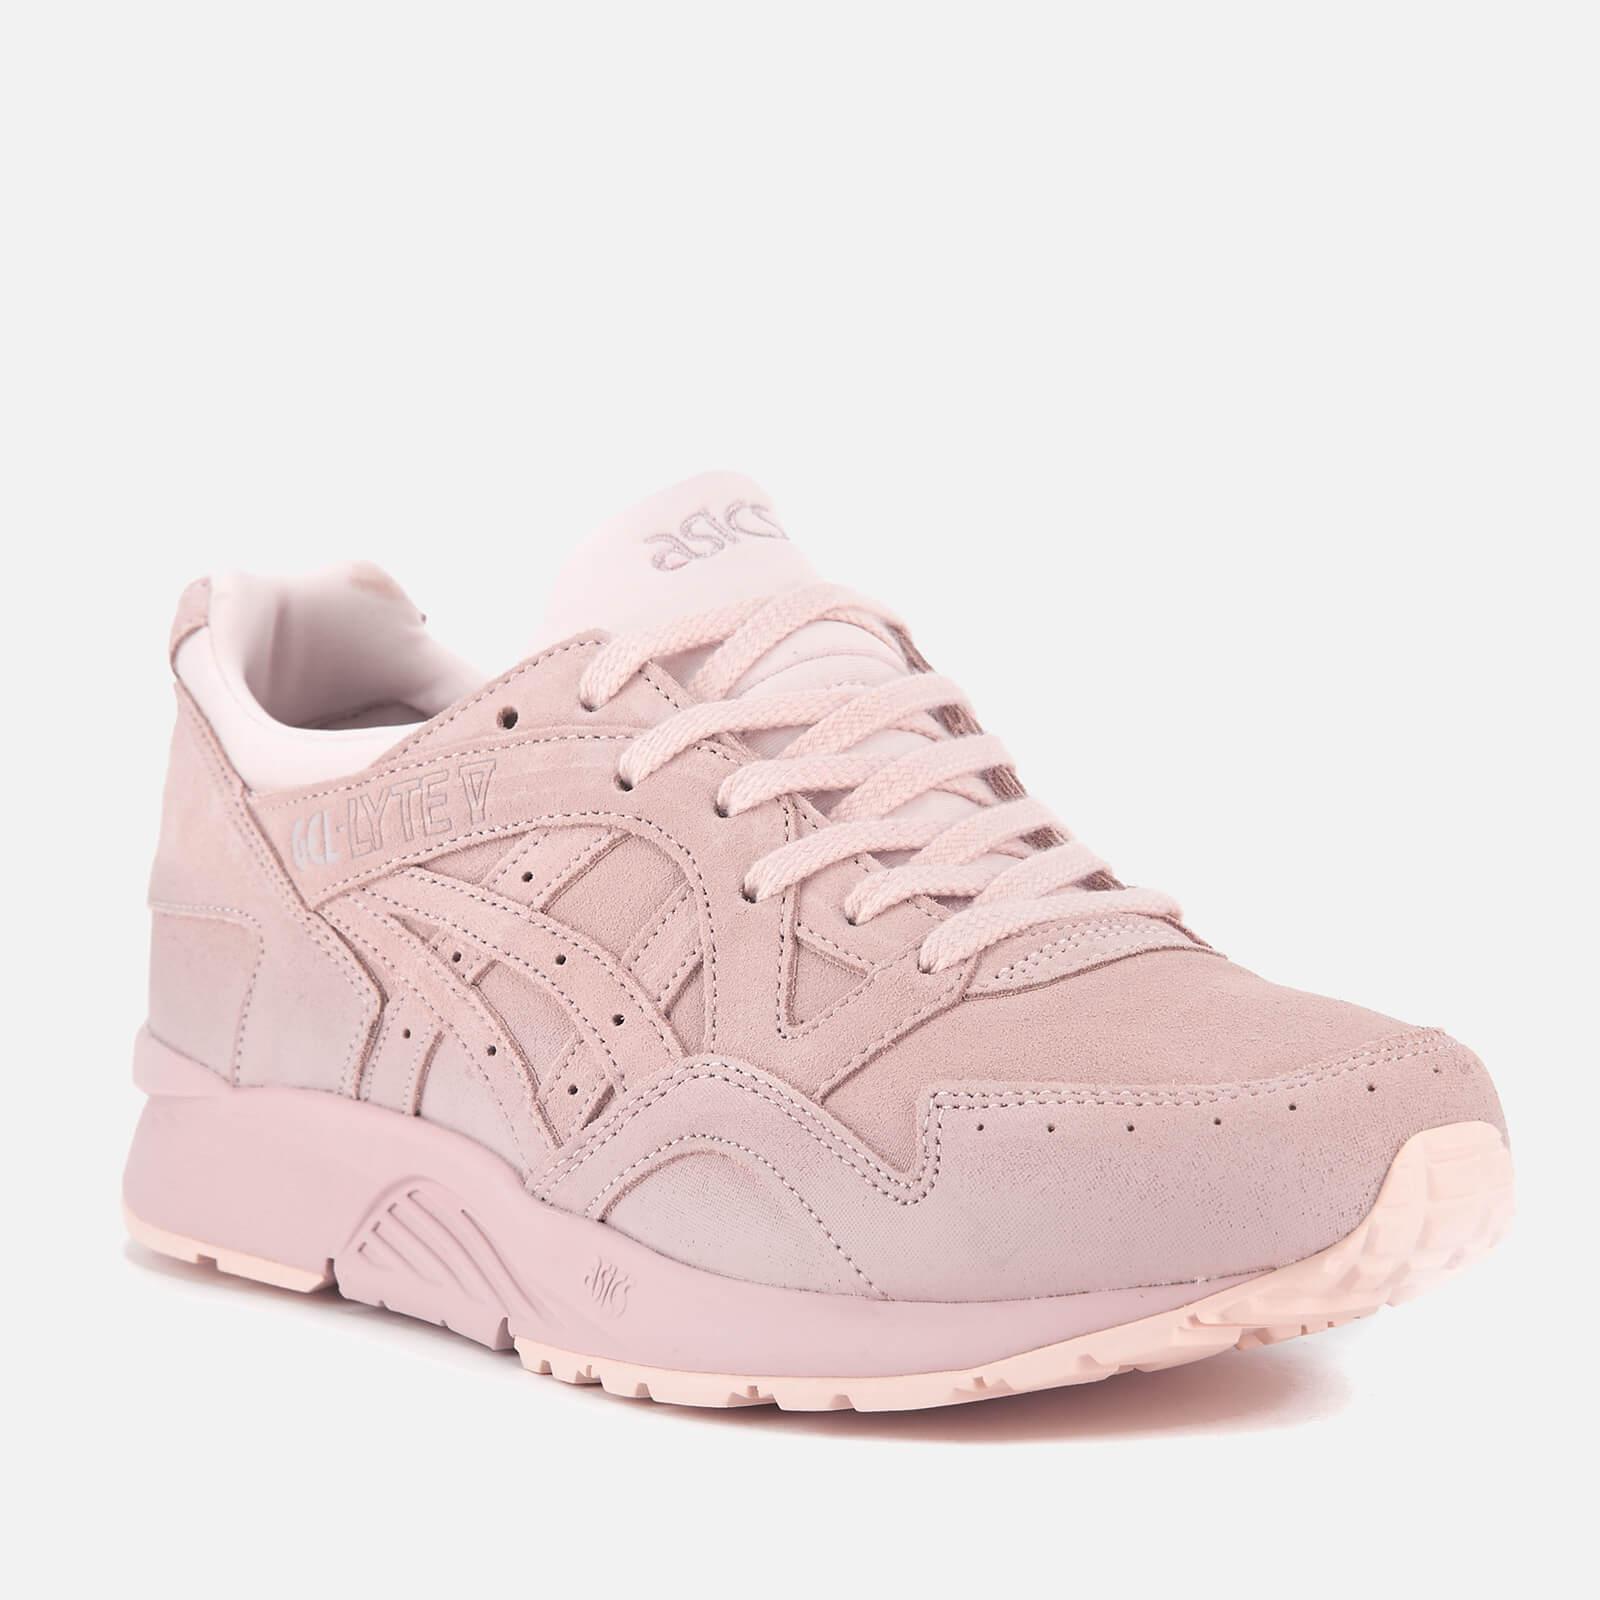 Asics Gel-lyte V Suede Trainers in Cream/Pink (Pink) | Lyst